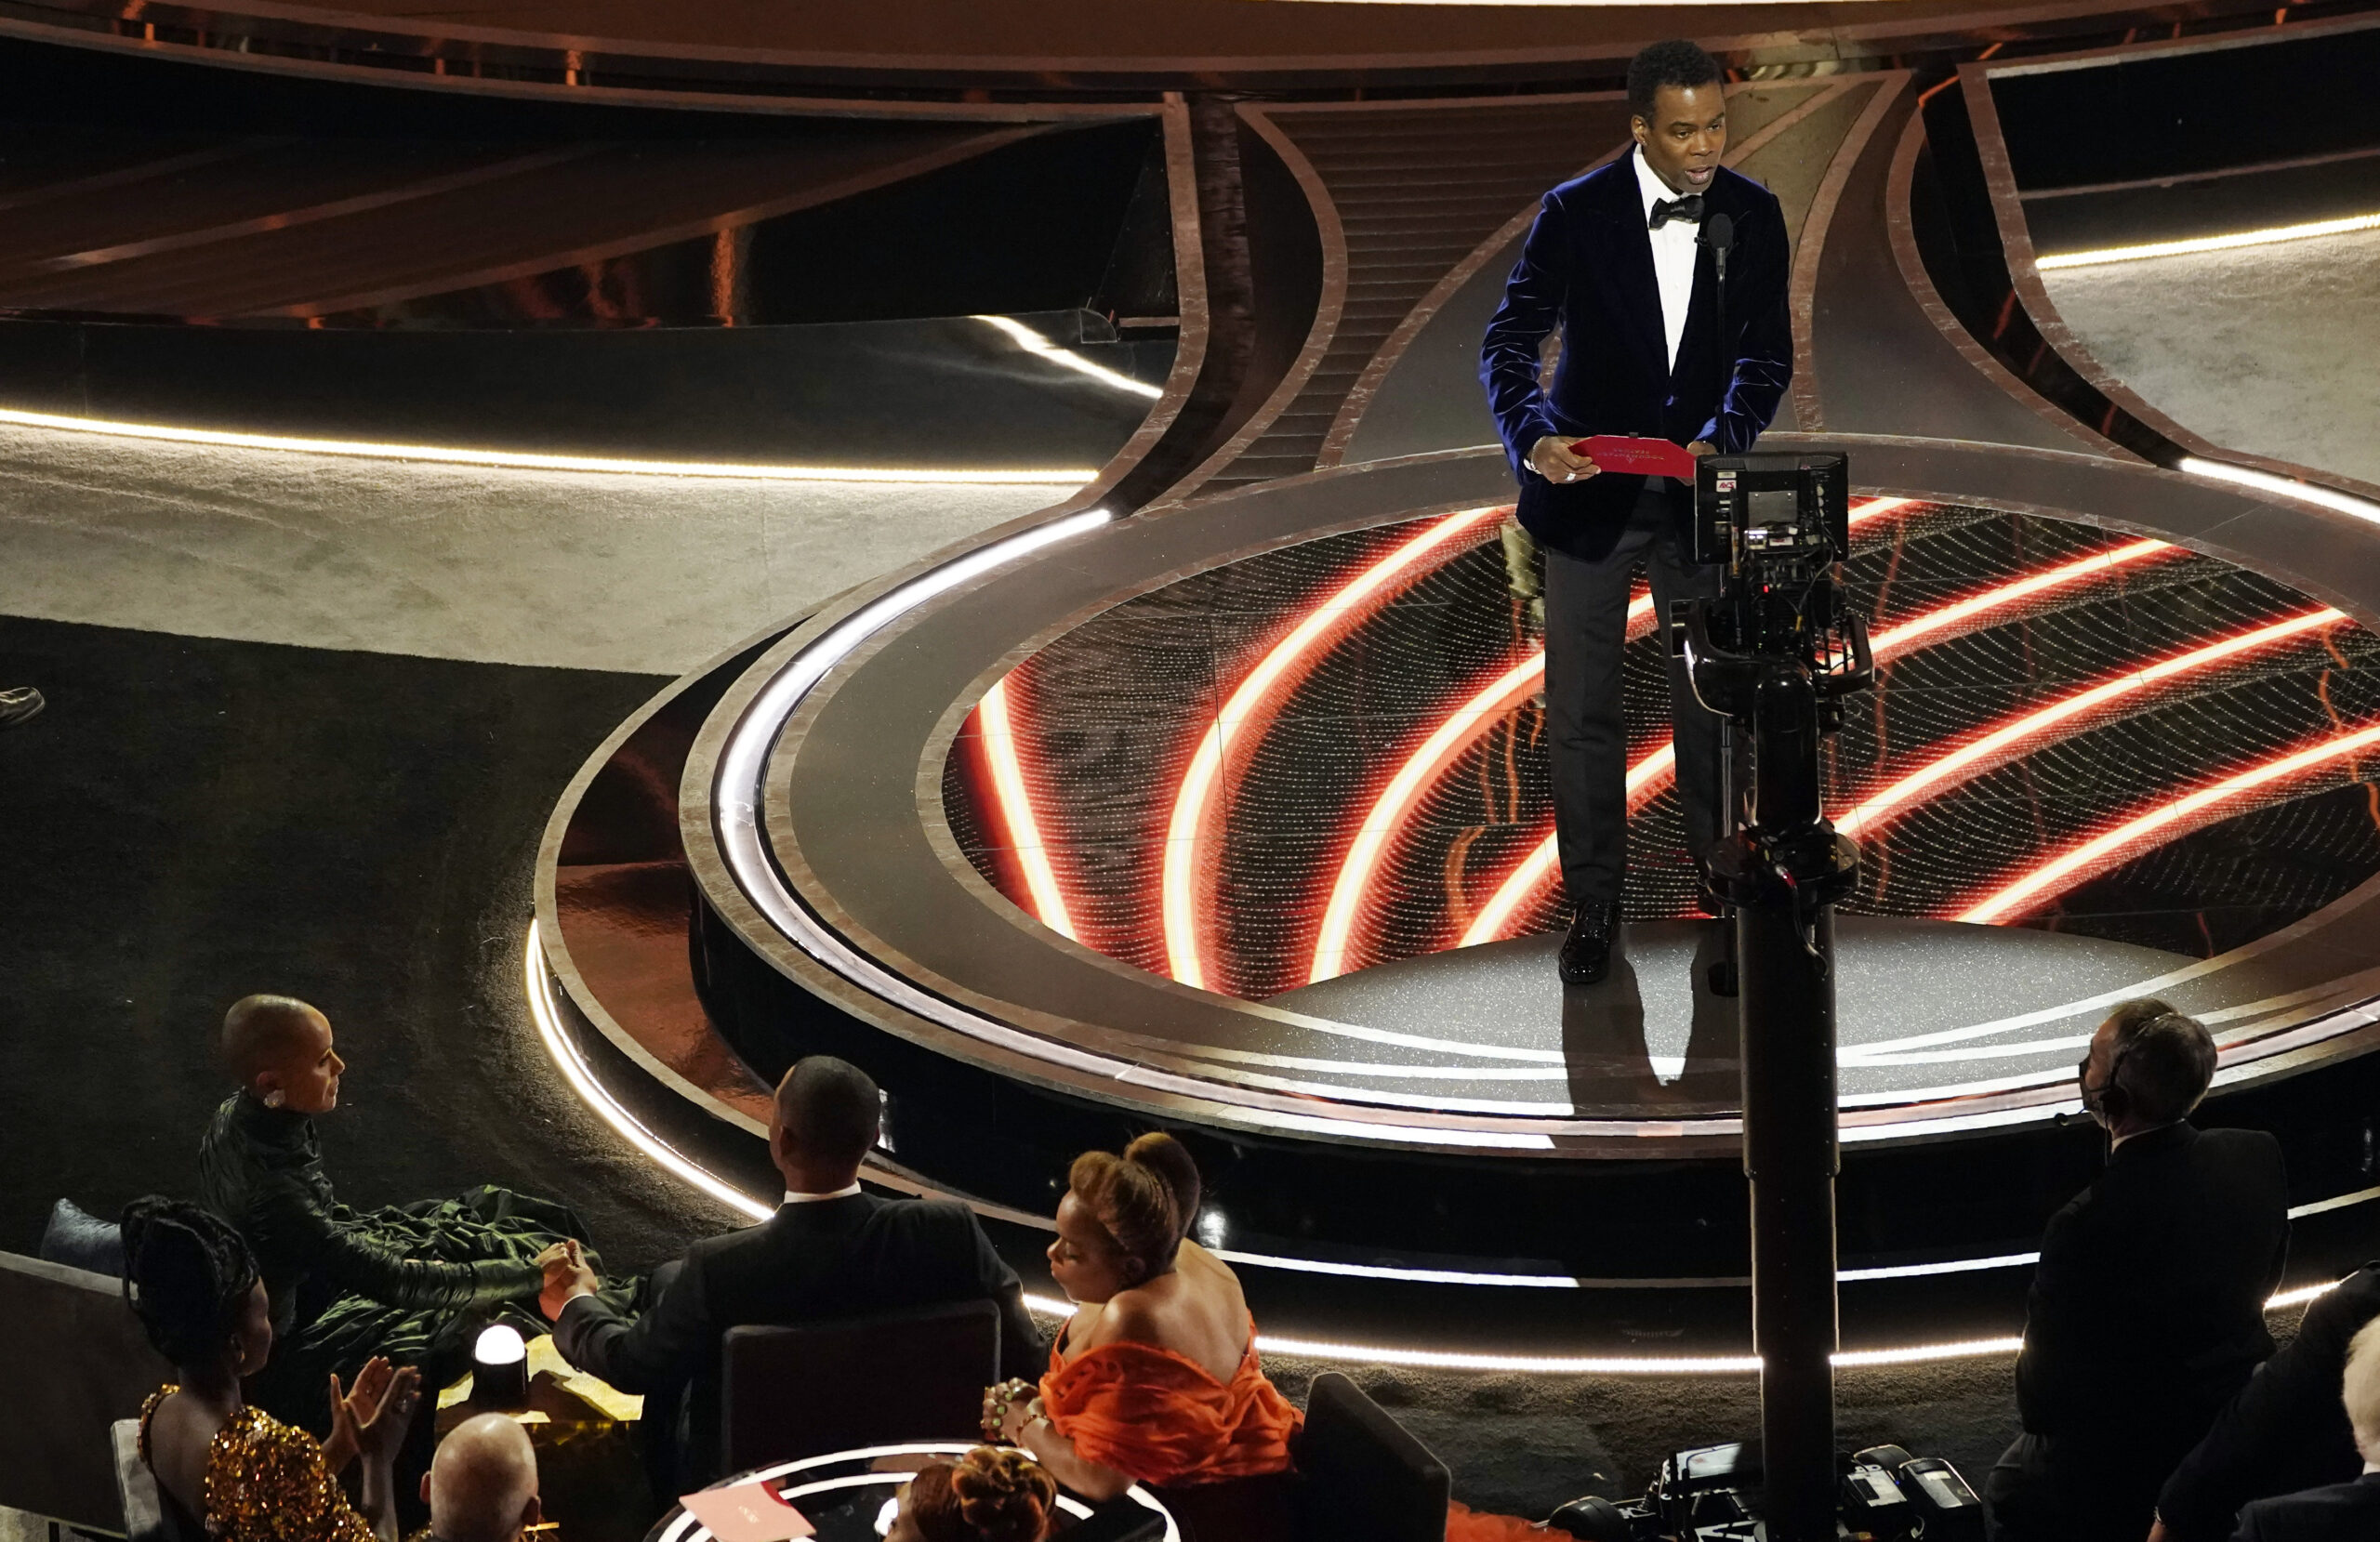 Presenter Chris Rock, right, speaks onstage as Jada Pinkett Smith and Will Smith, bottom left, look on after Smith went onstage and slapped Rock at the Oscars, Sunday, March 27, 2022, at the Dolby Theatre in Los Angeles. (AP Photo/Chris Pizzello)